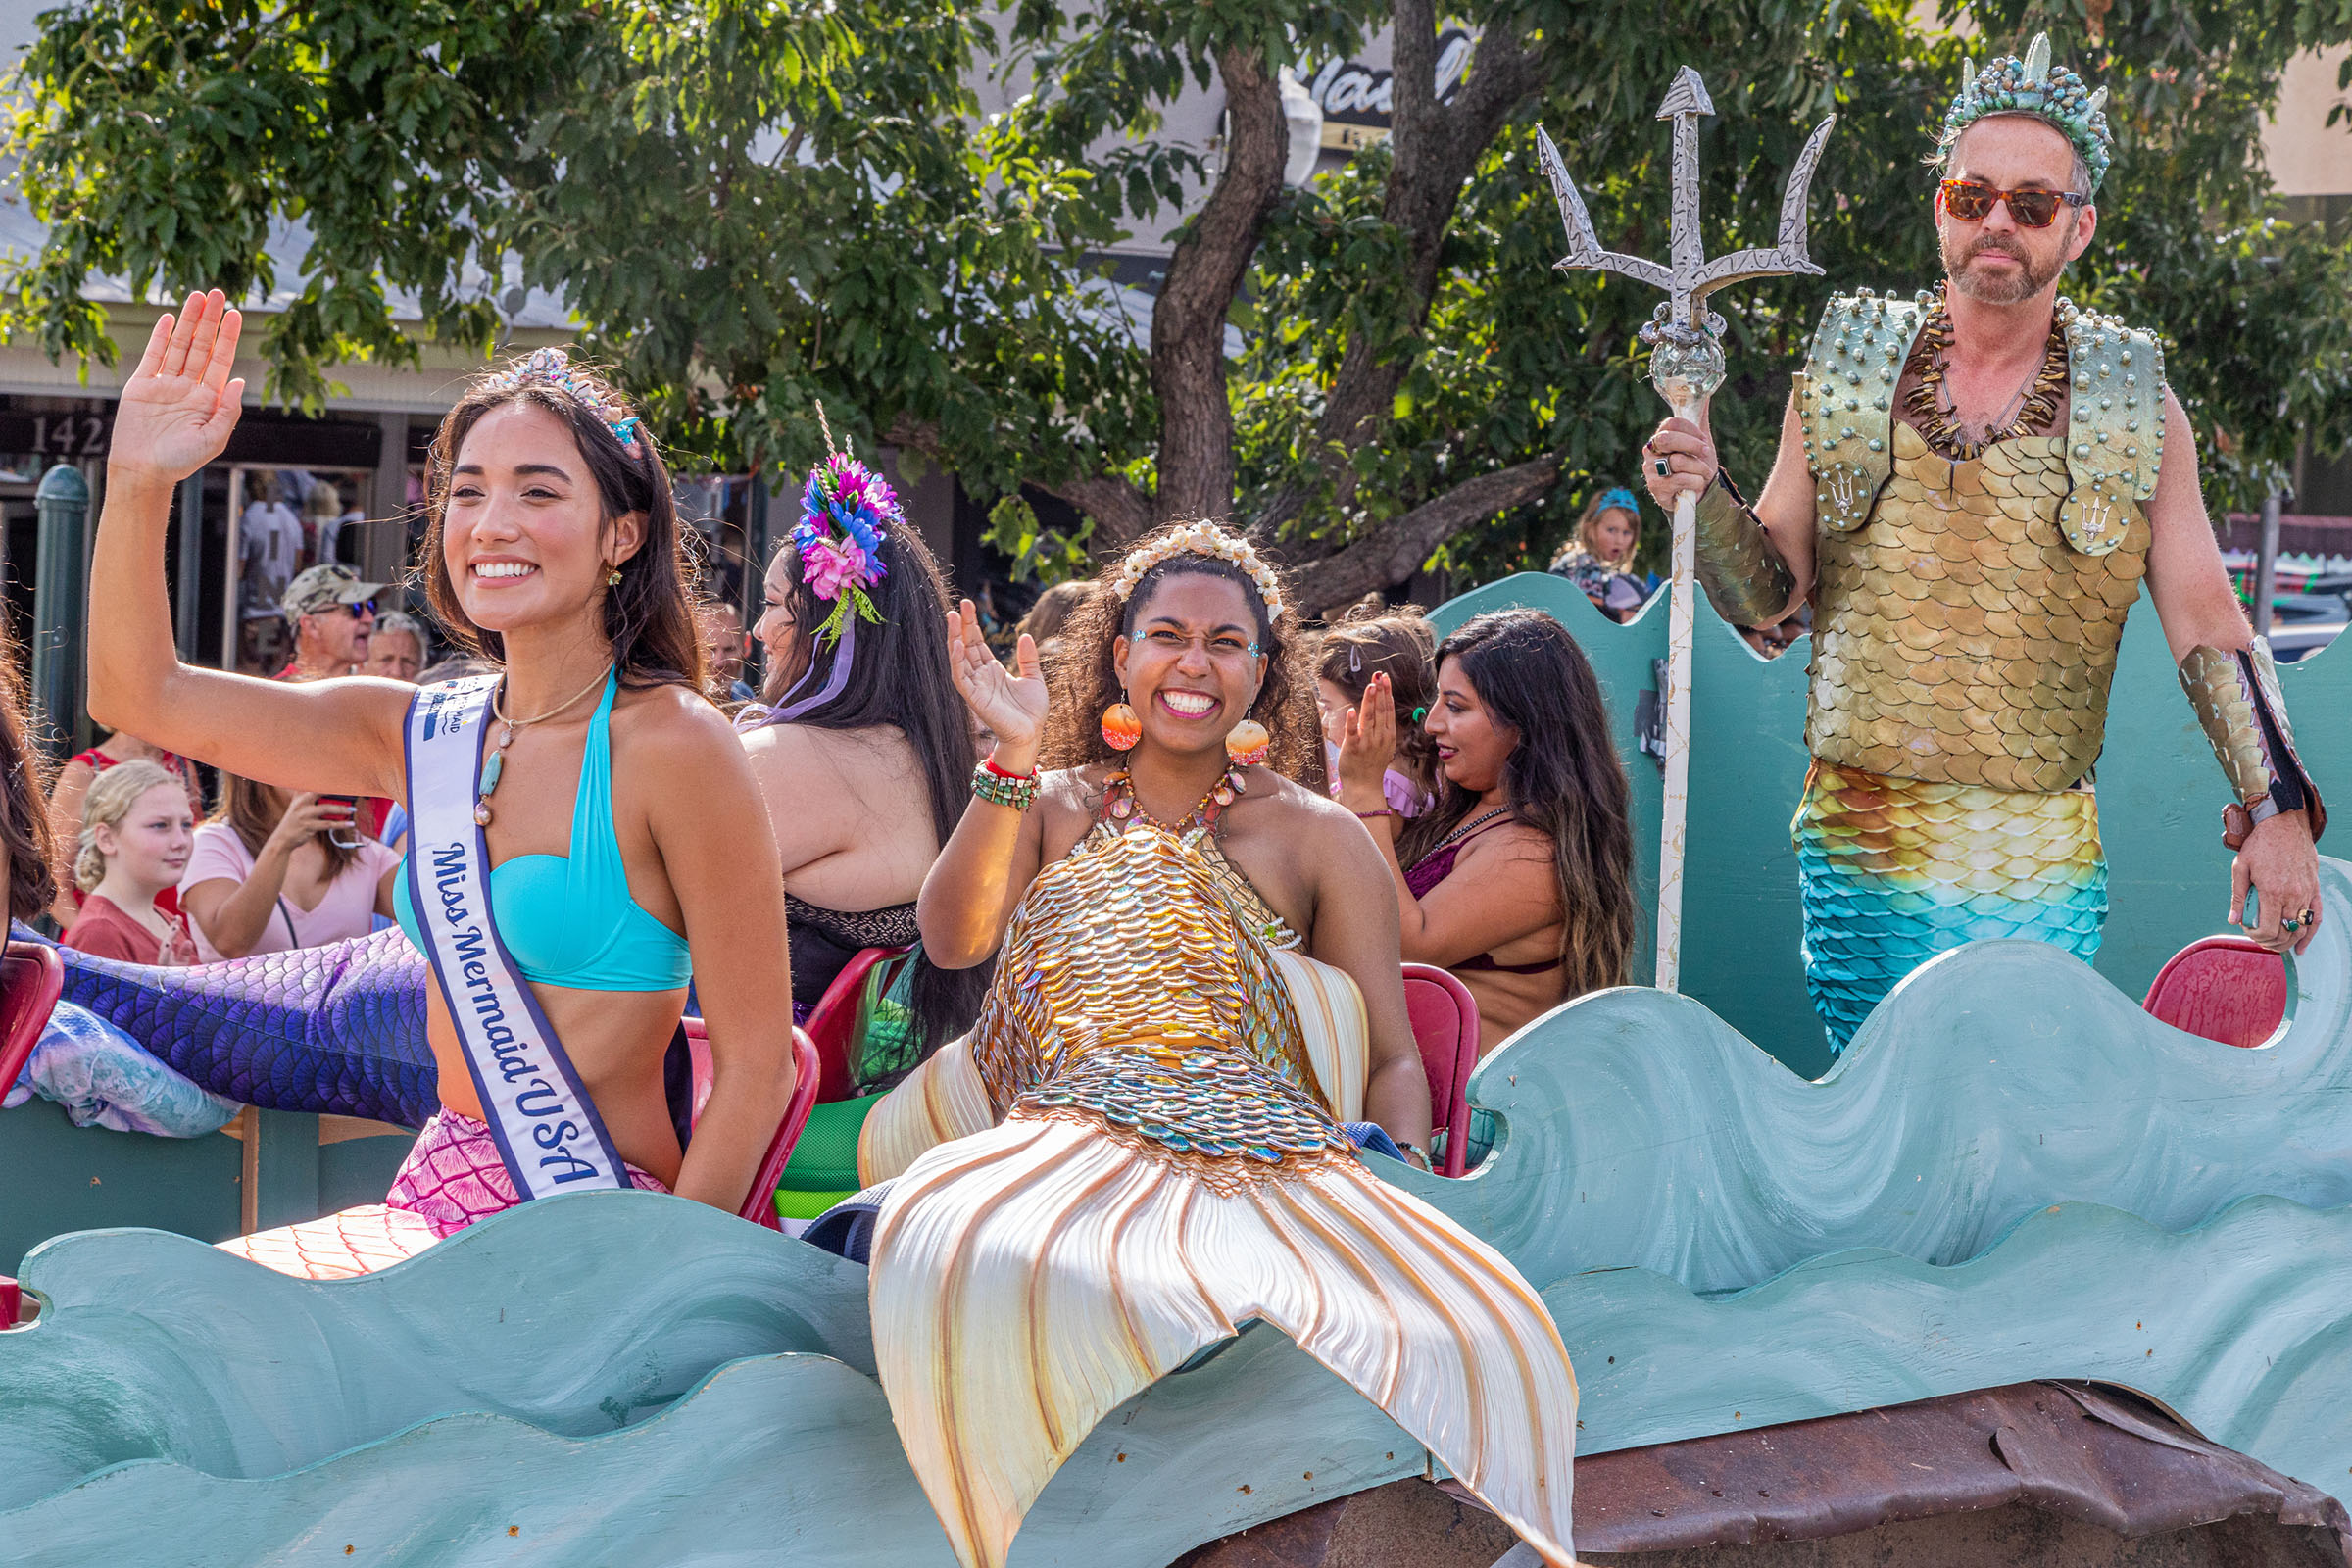 A group of men and women in mermaid costumes pose on a parade float